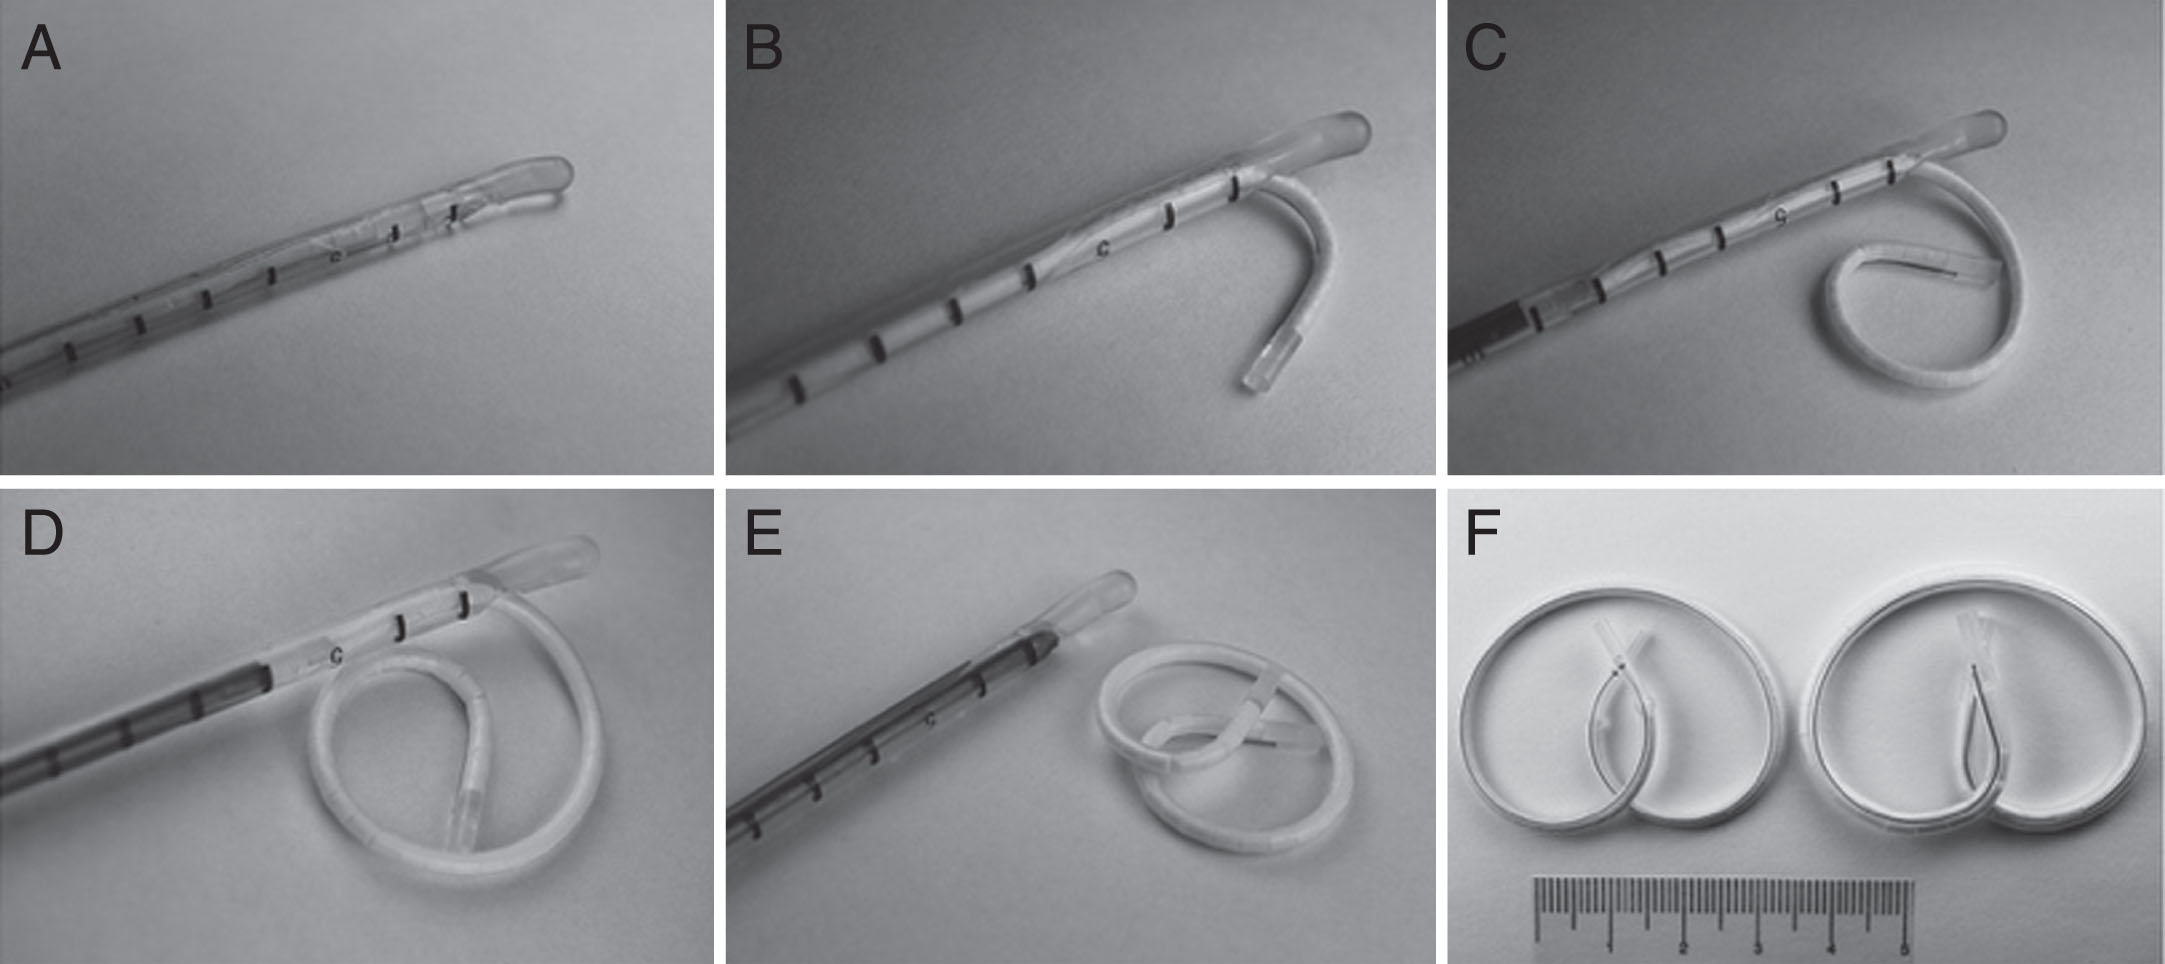 Deployment of LiRIS® through a specialized catheter as demonstrated in (A) through (E). Two devices containing different doses of the same medication are shown in (F) with a 5 cm ruler for scale. Reproduced with permission [24].